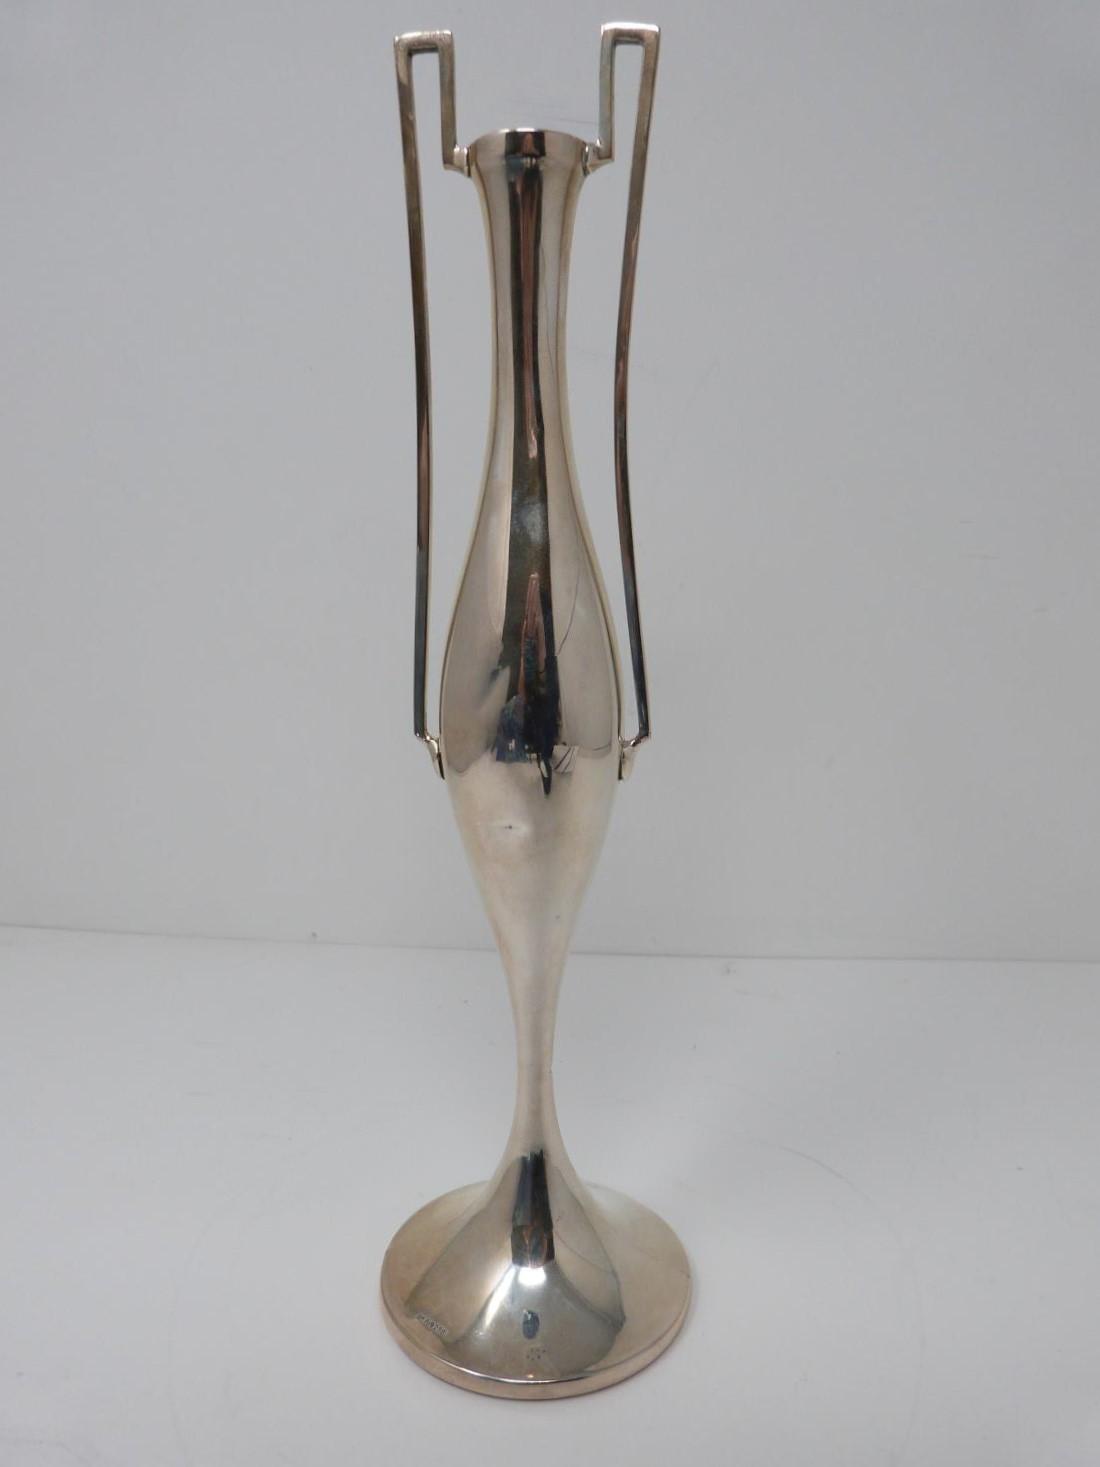 A two handled silver vase. Engraved H.A.C. 1911. Hallmarked: H J C & Co for Henry James Cooper & - Image 4 of 5